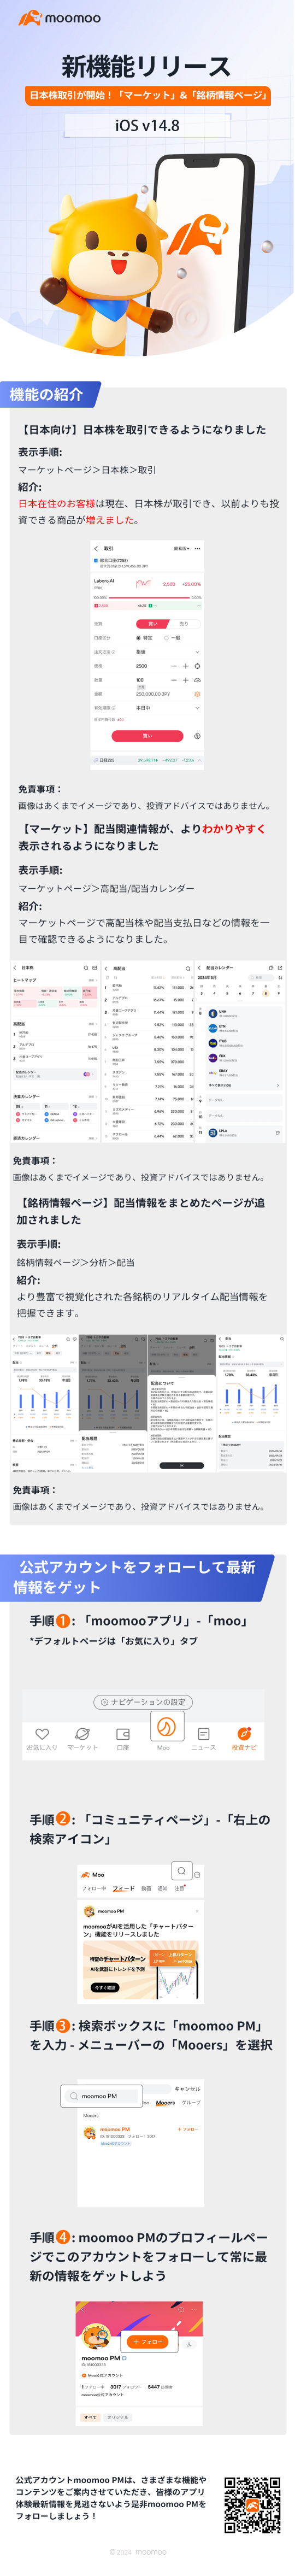 New feature released: Japanese stock trading has started! “Market” & “Stock Information Page” iOS v14.8